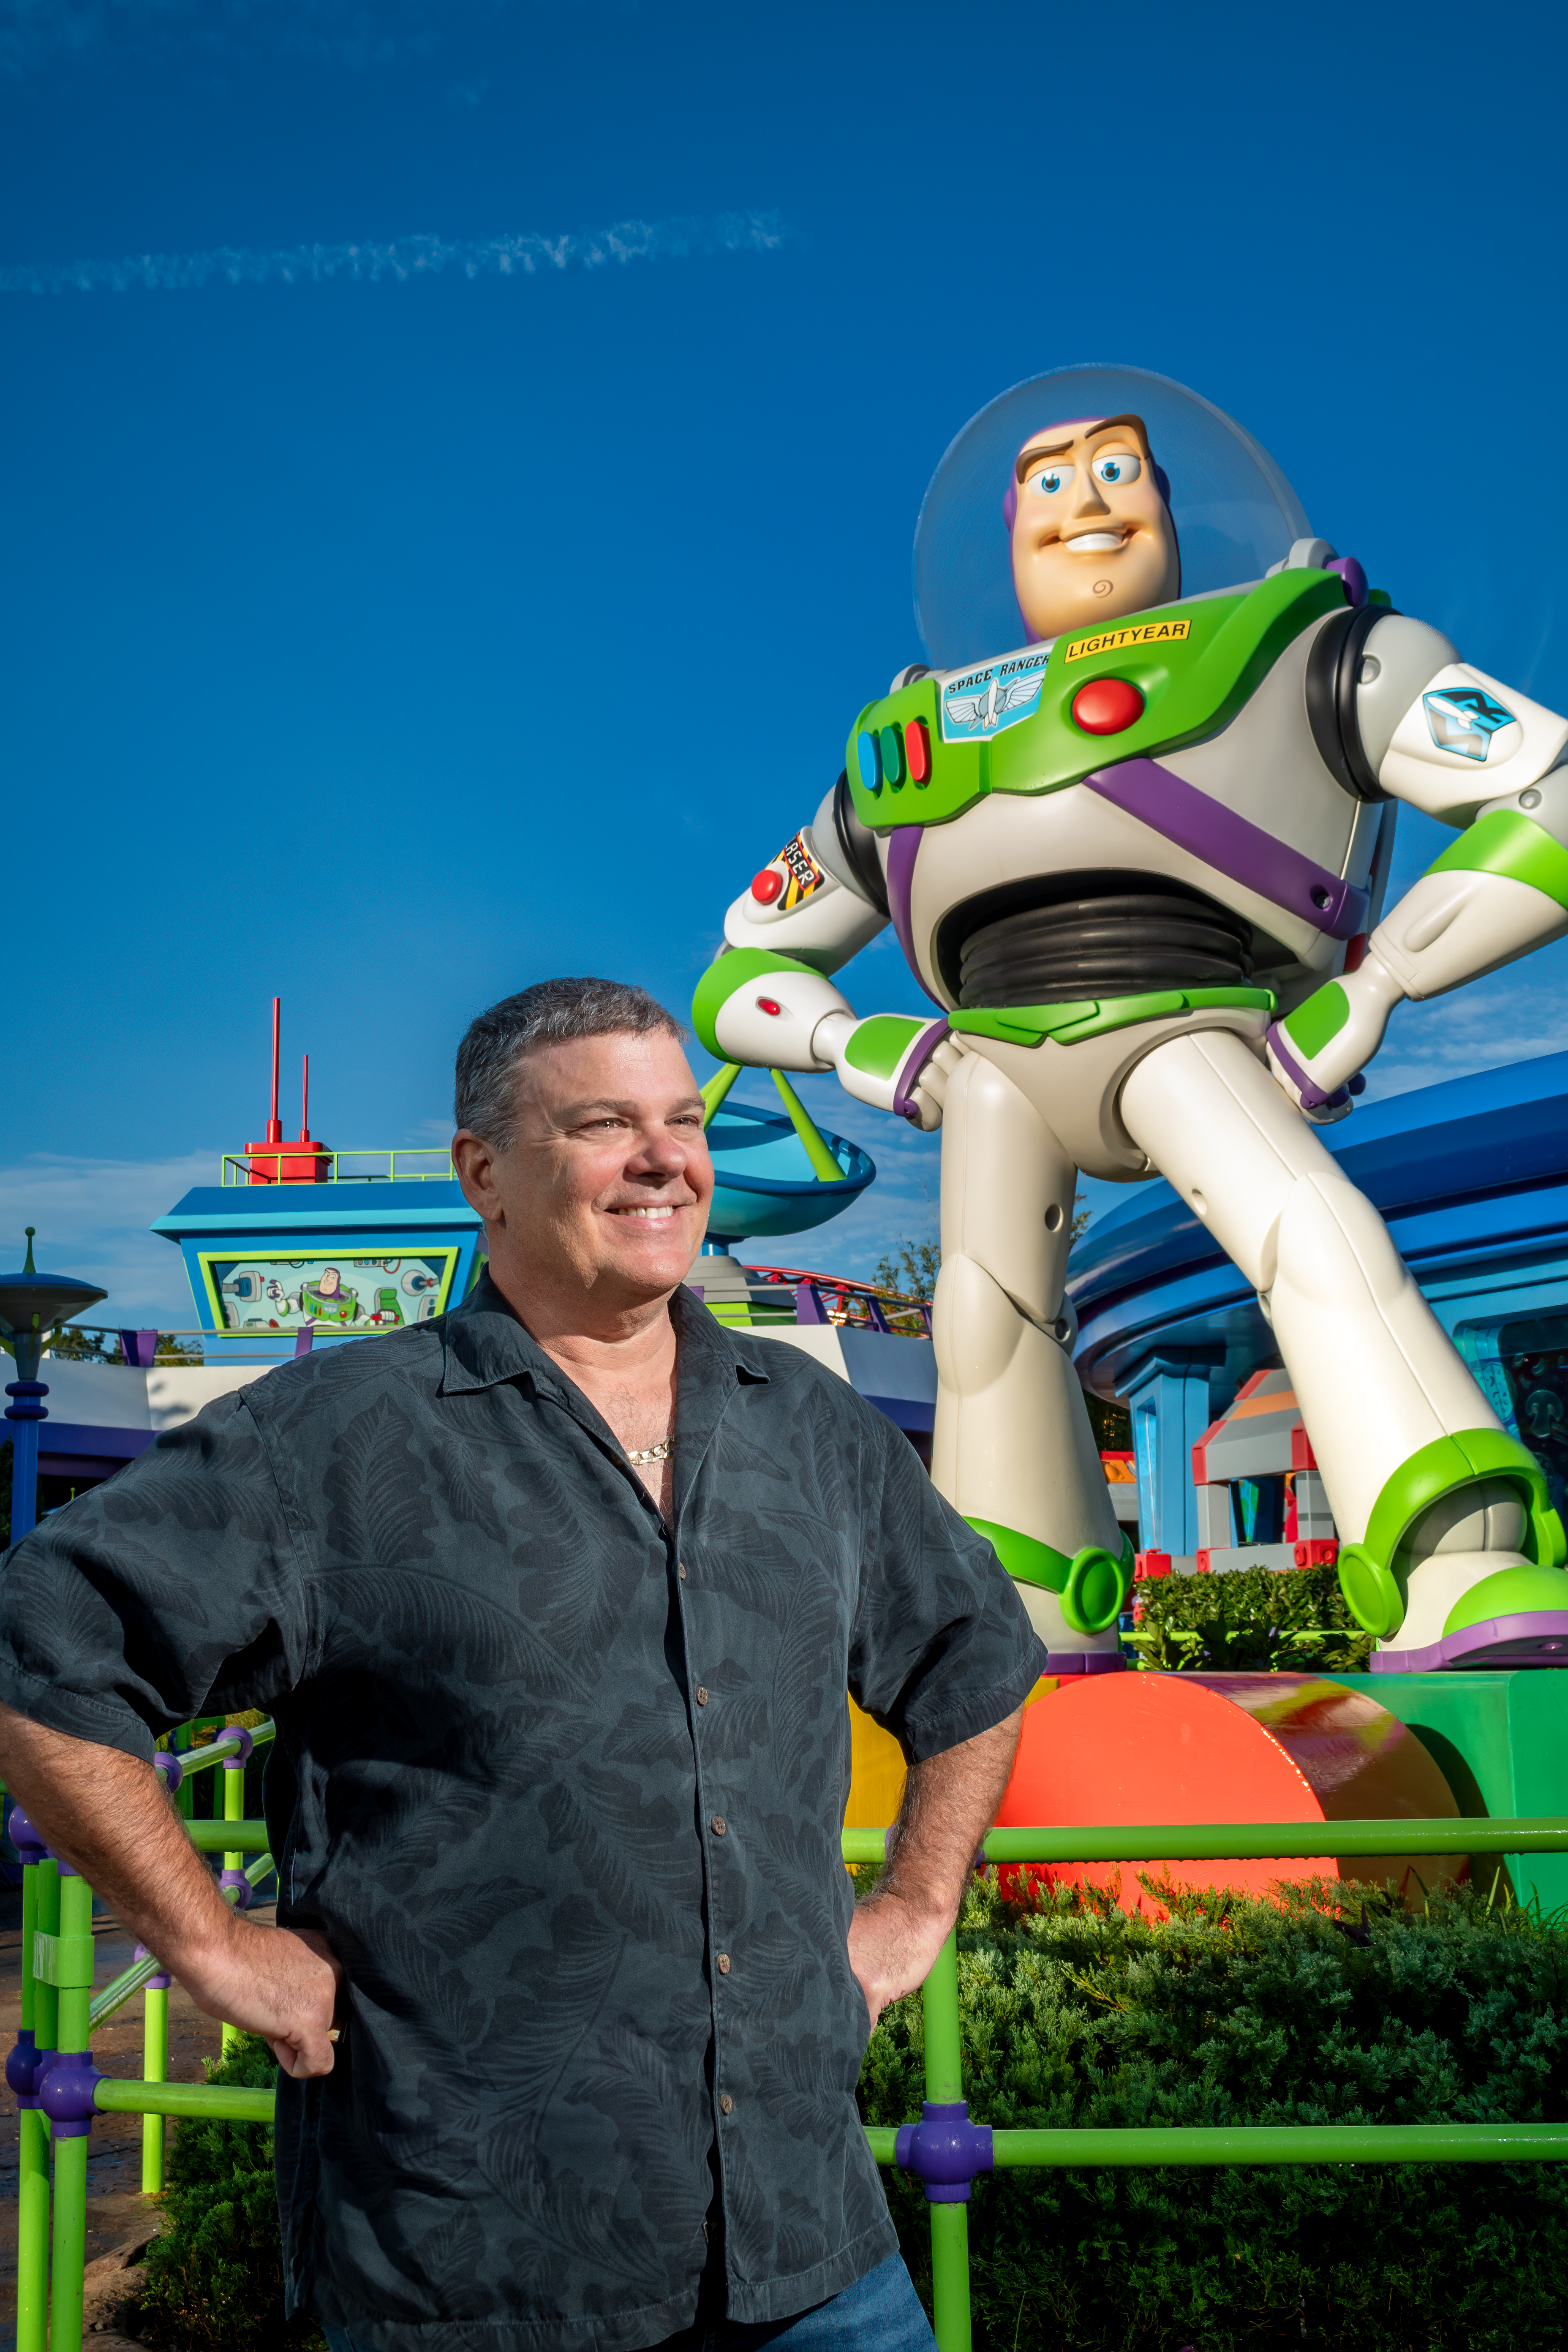 Drayton Knox, Owner of Icarus Exhibits stands under Buzz Lightyear statue in Toy Story Land at Disney’s Hollywood Studios.